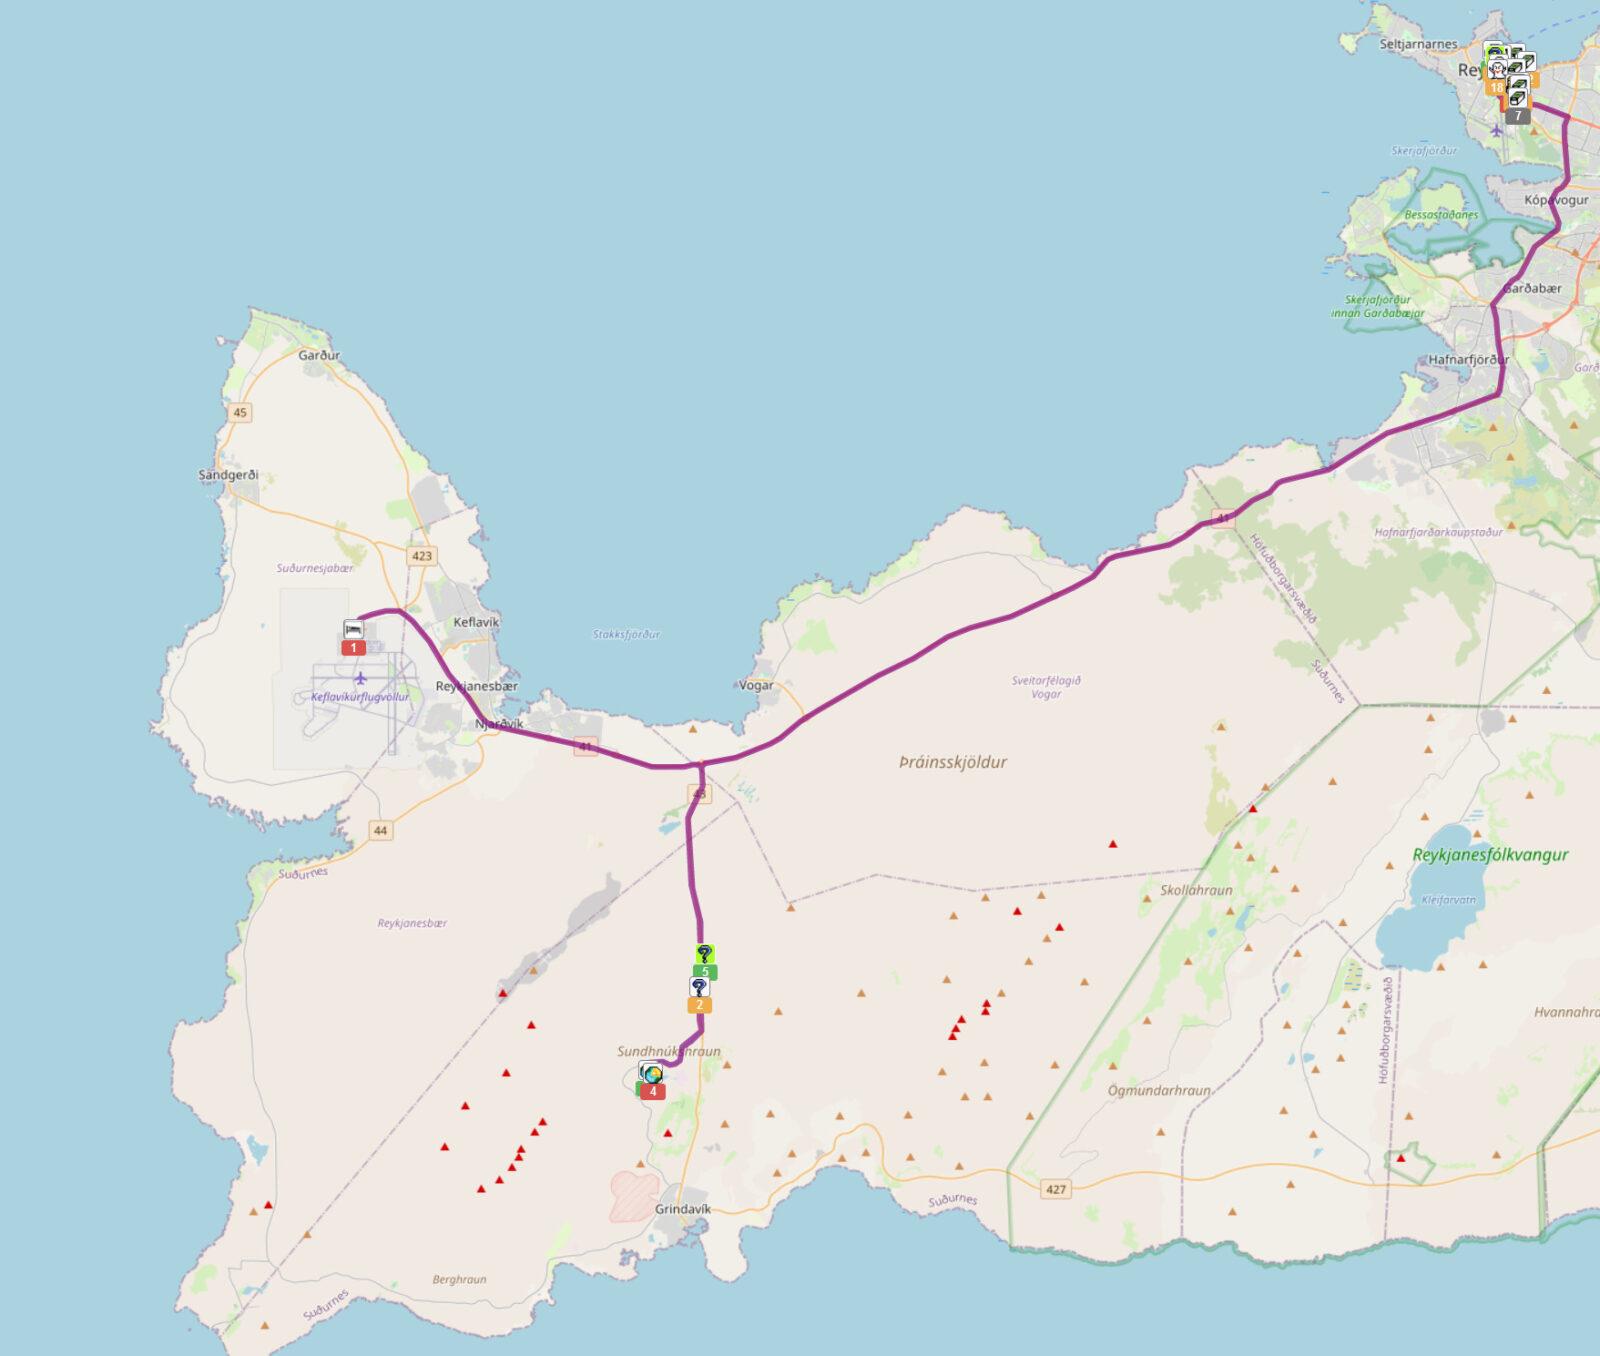 Map showing route from Keflavik airport, via Blue Lagoon (geocaches, currnetly) then Reykjavik where I"ll overnight.